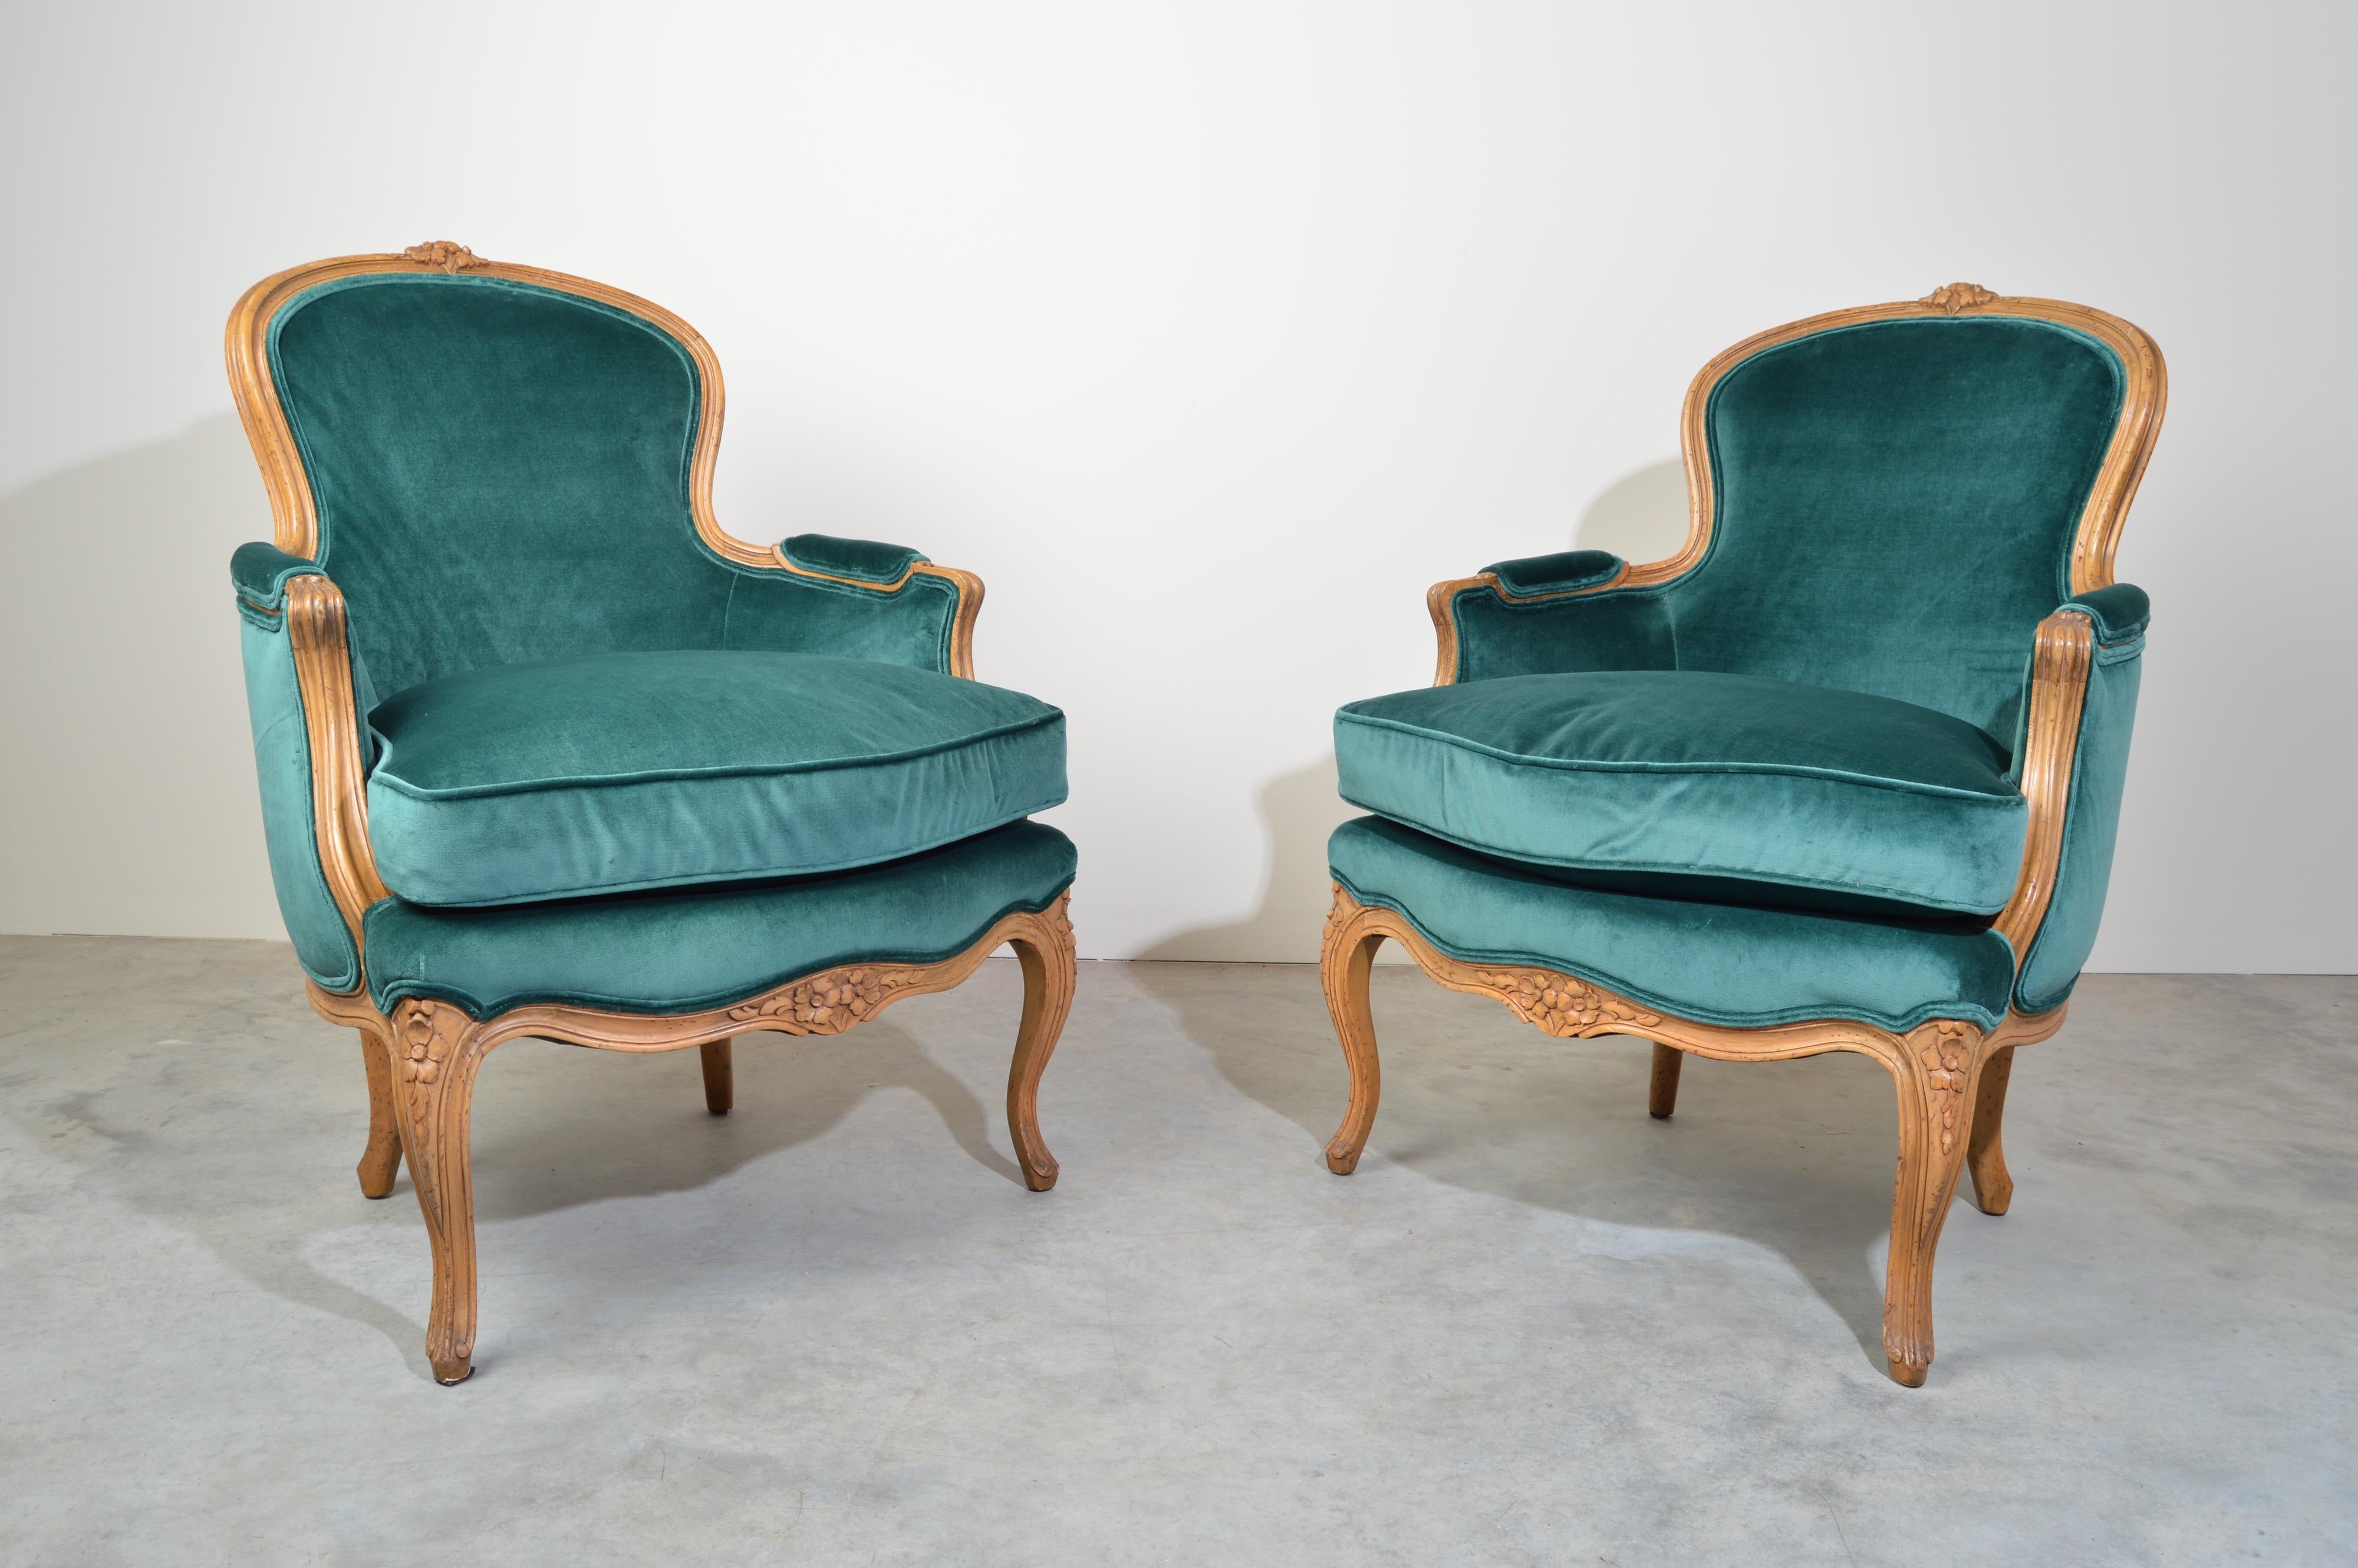 A stunning pair of vintage Baker Furniture Louis XV style Bergère lounge chairs with single ottoman newly upholstered in blue velvet.
Incredibly comfortable.
Very good condition having beautiful patina to the frames, new upholstery and overstuffed